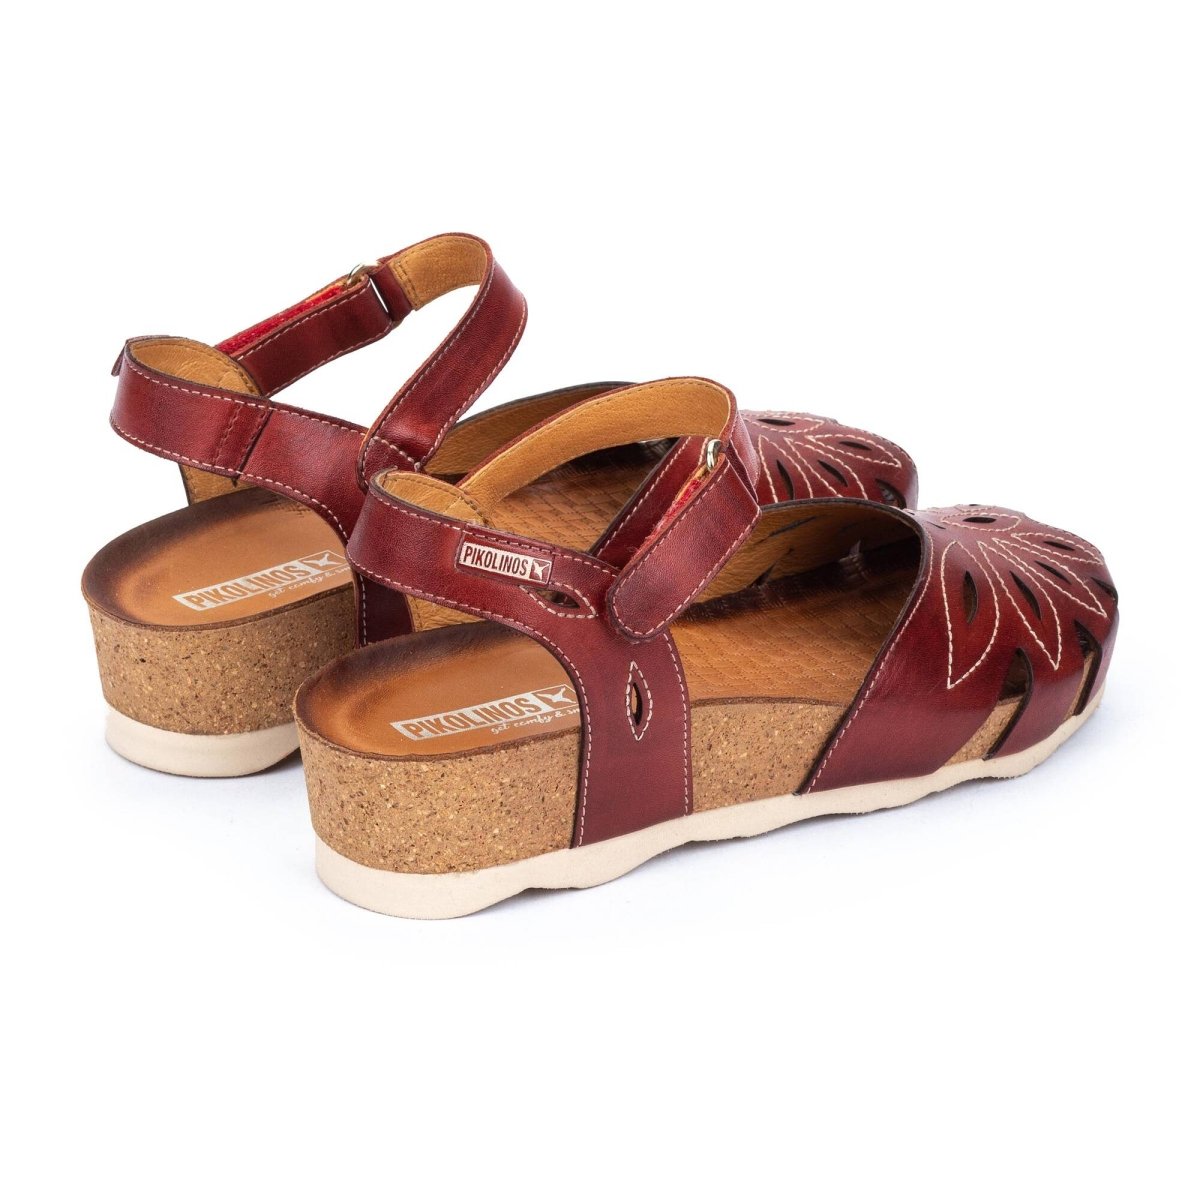 PIKOLINOS MAHON W9E-0682 SLINGBACK WEDGES SANDALS IN SANDIA - TLW Shoes